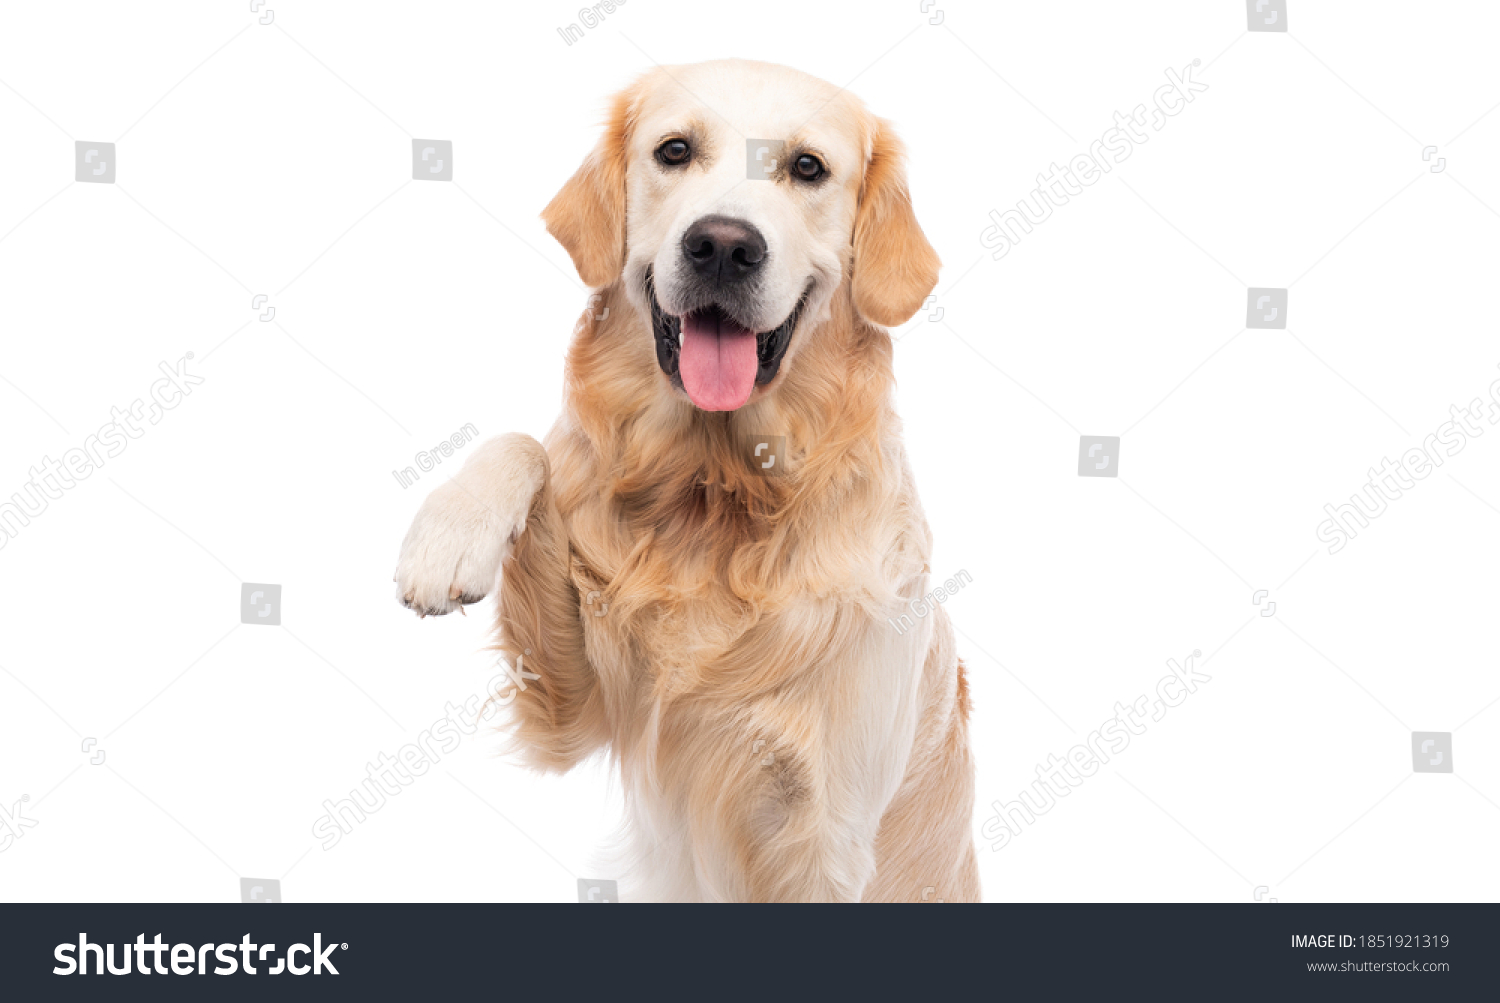 Golden retriever dog with paw up isolated on a white background #1851921319